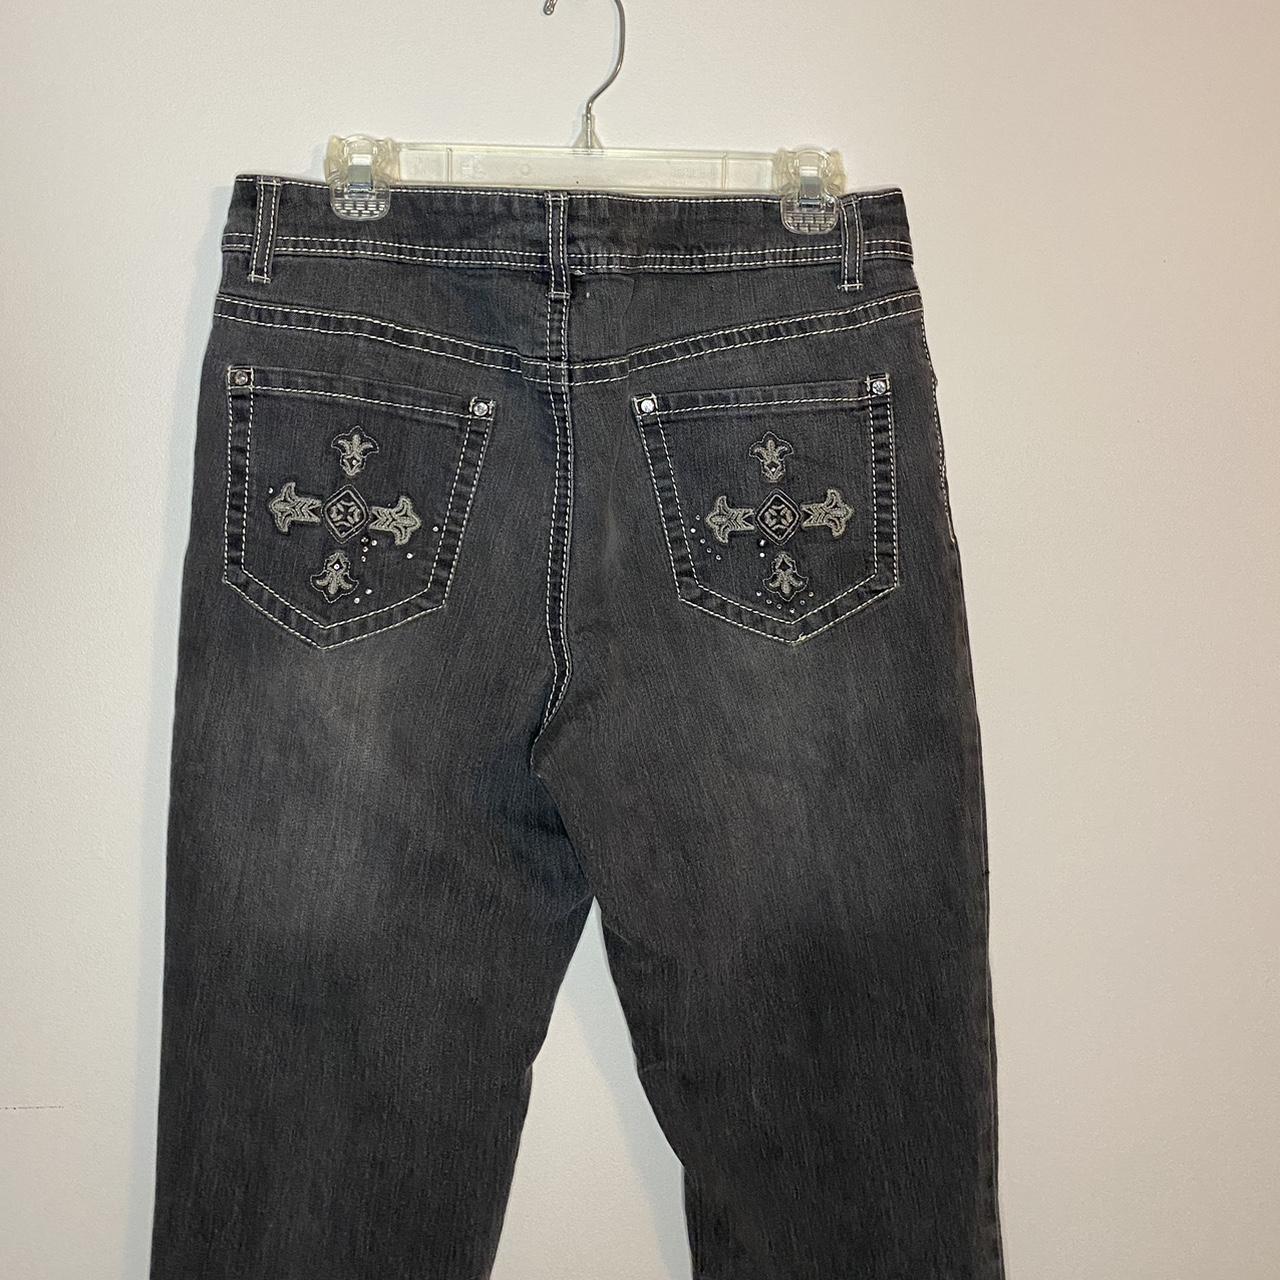 Faded Glory vintage cross jeans No known... - Depop